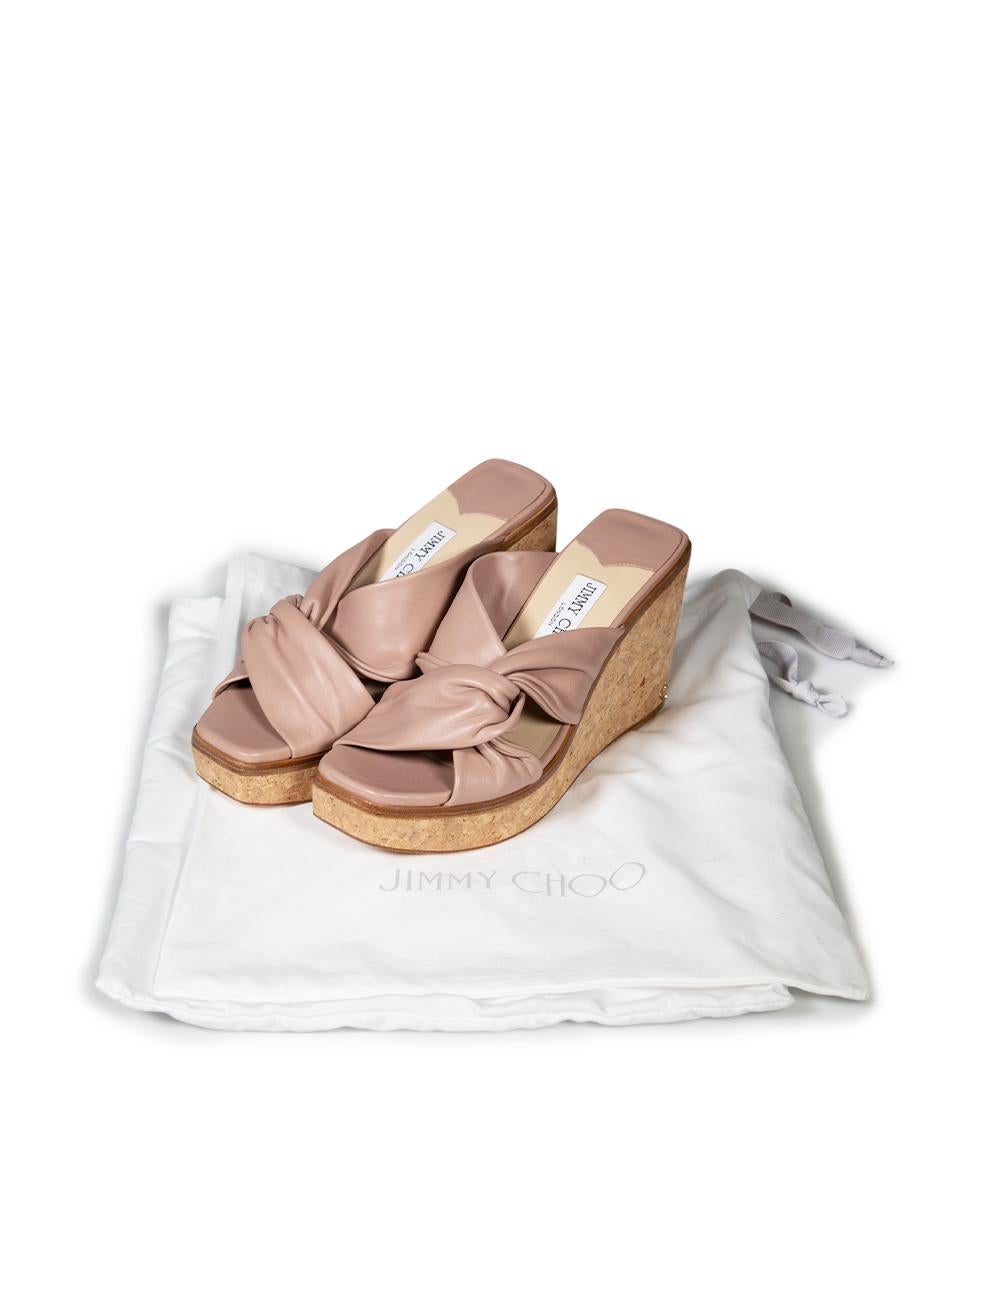 Jimmy Choo Pink Leather Cork Wedges Size IT 37 For Sale 1